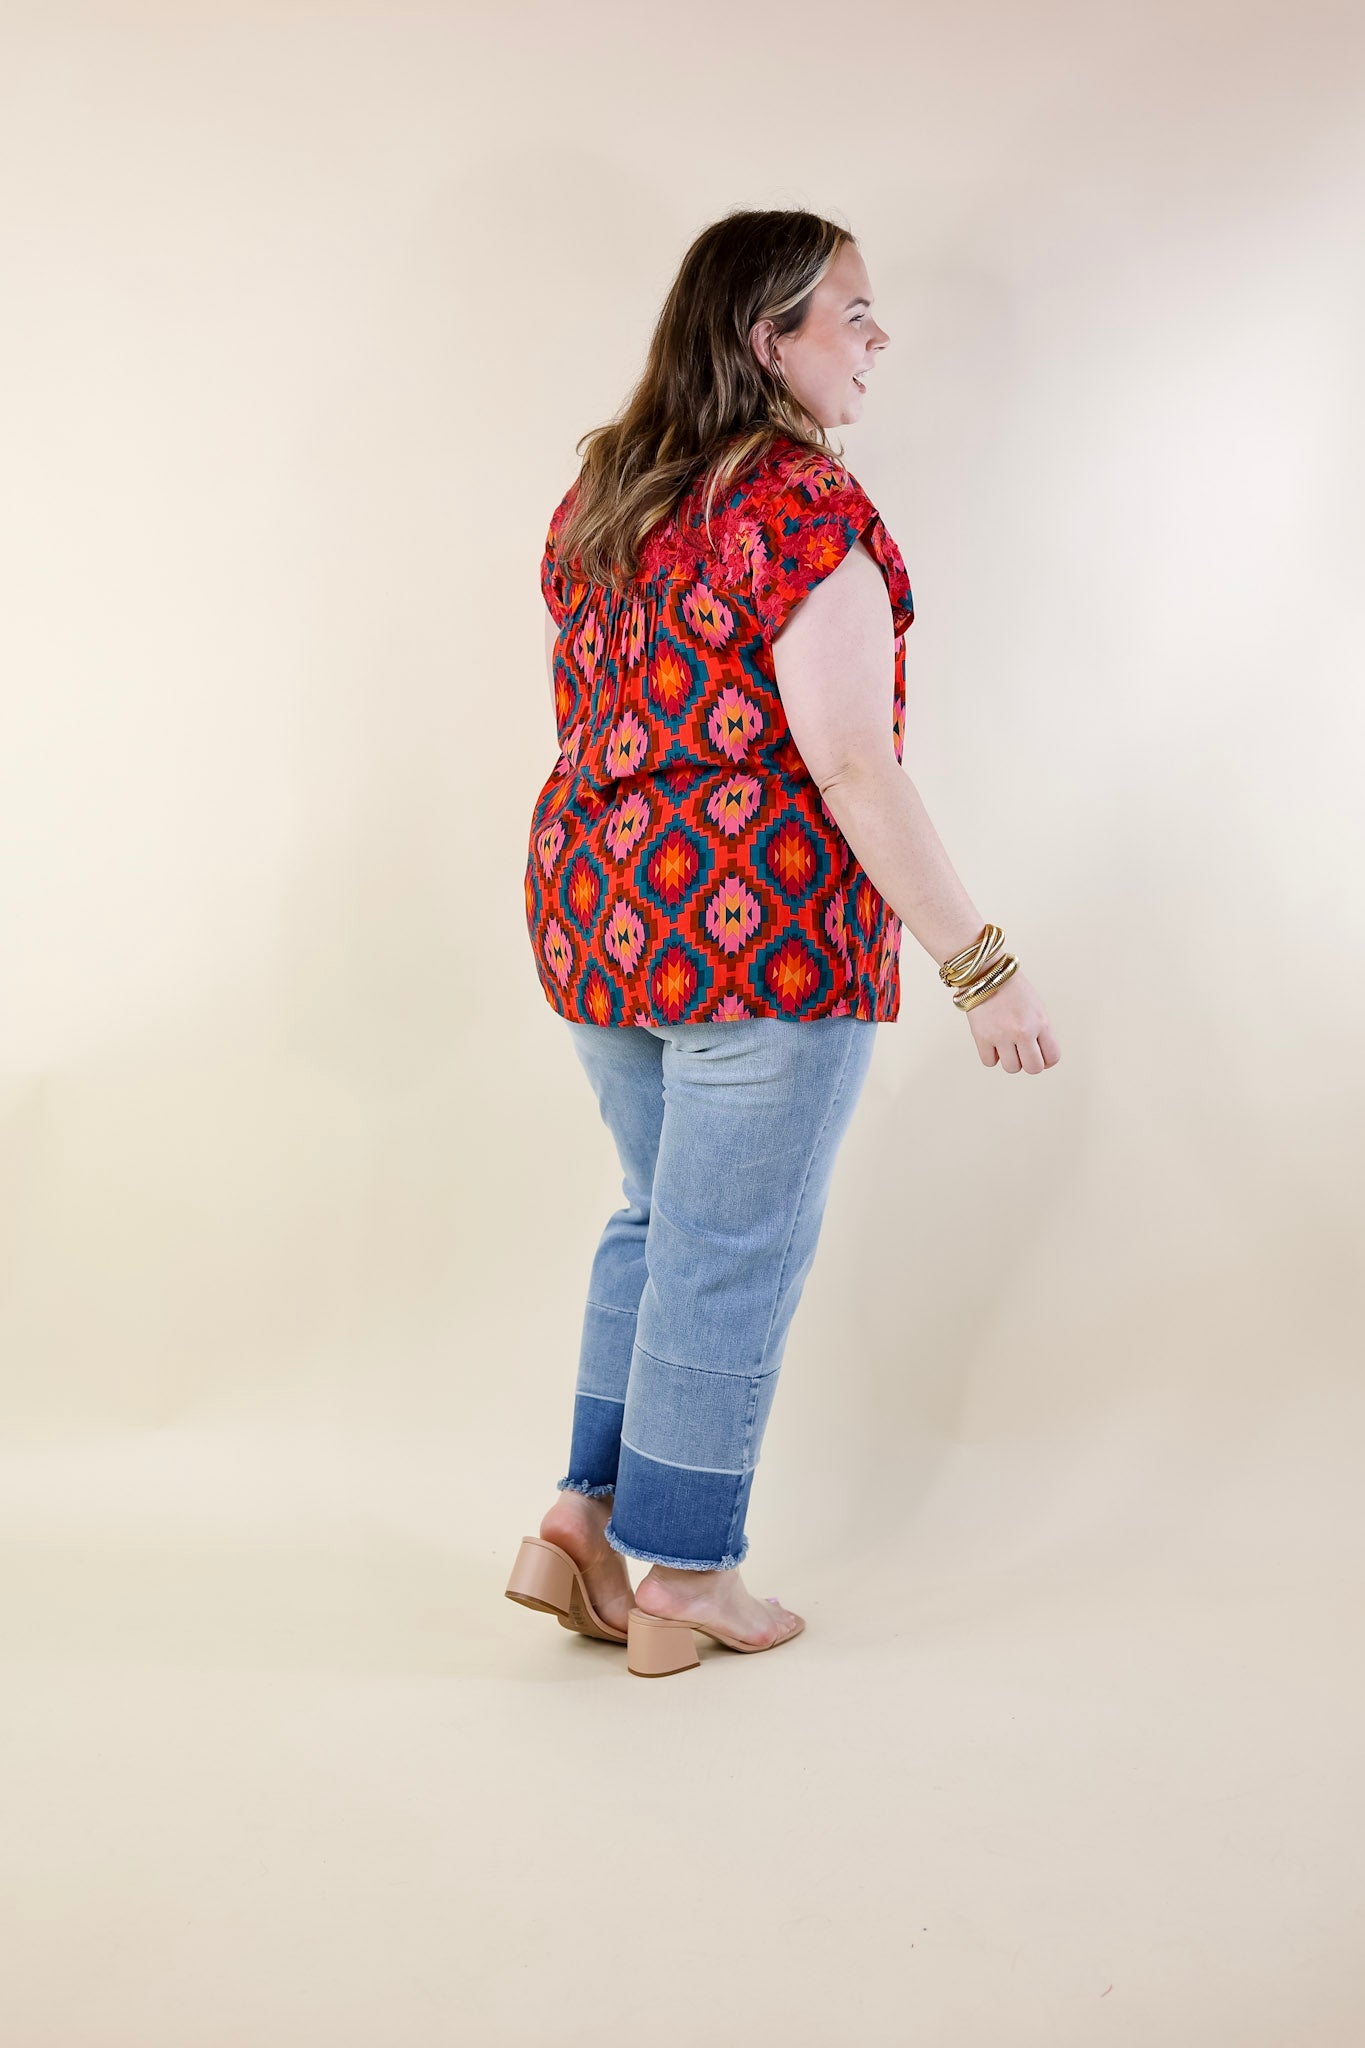 Festival Weather Magenta Embroidered Southwestern Print Top with Cap Sleeves in Multi Mix - Giddy Up Glamour Boutique